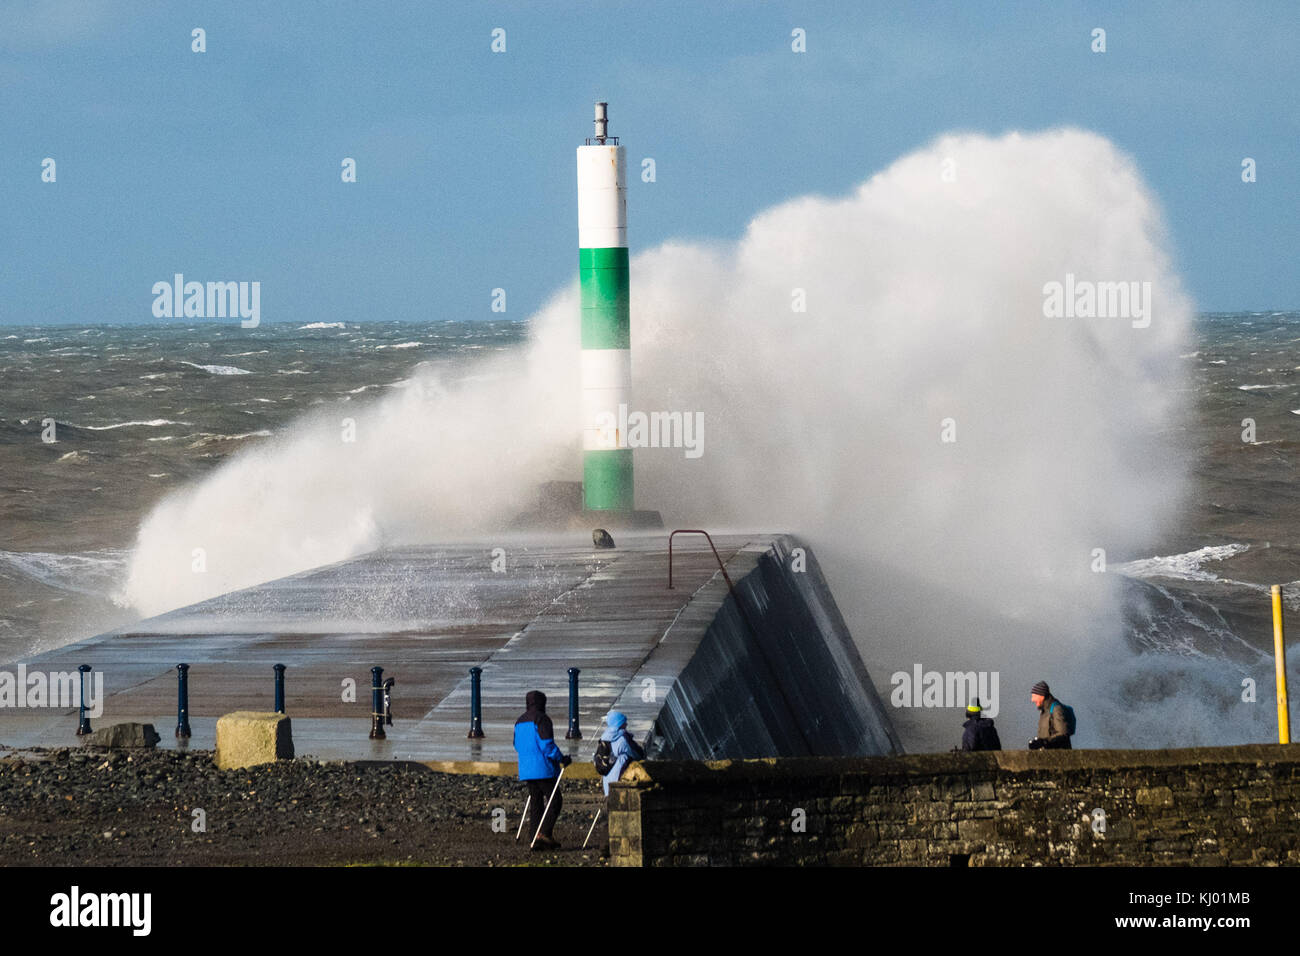 Aberystwyth Wales UK, Thursday 23 November 2017 UK Weather: A group of walkers look on as high tides and very strong winds combine to bring waves crashing into the sea defences and the harbour lighthouse in Aberystwyth, on the Cardigan Bay coast of west wales. photo Credit: Keith Morris/Alamy Live News Stock Photo